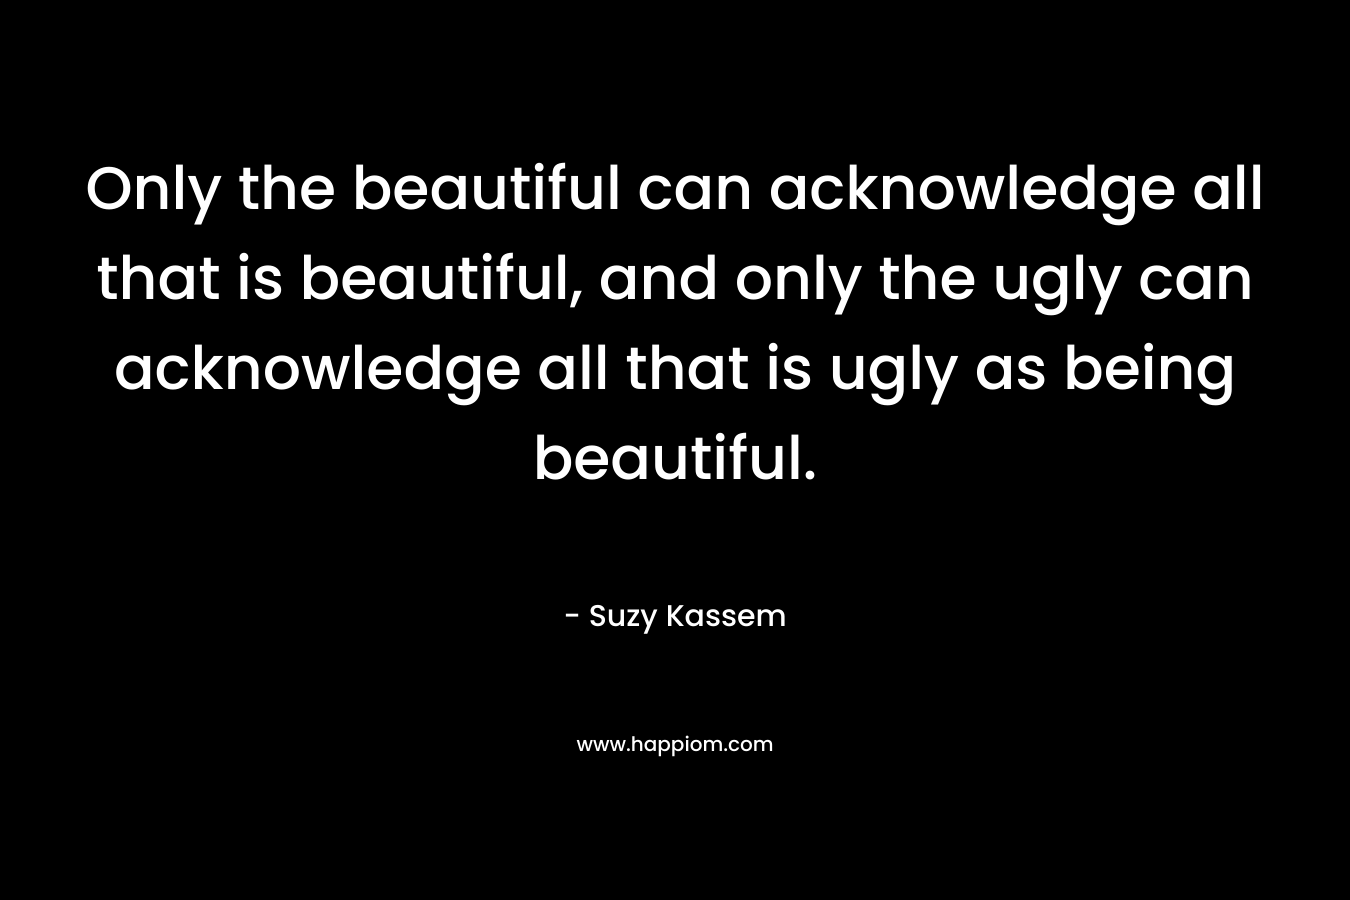 Only the beautiful can acknowledge all that is beautiful, and only the ugly can acknowledge all that is ugly as being beautiful.